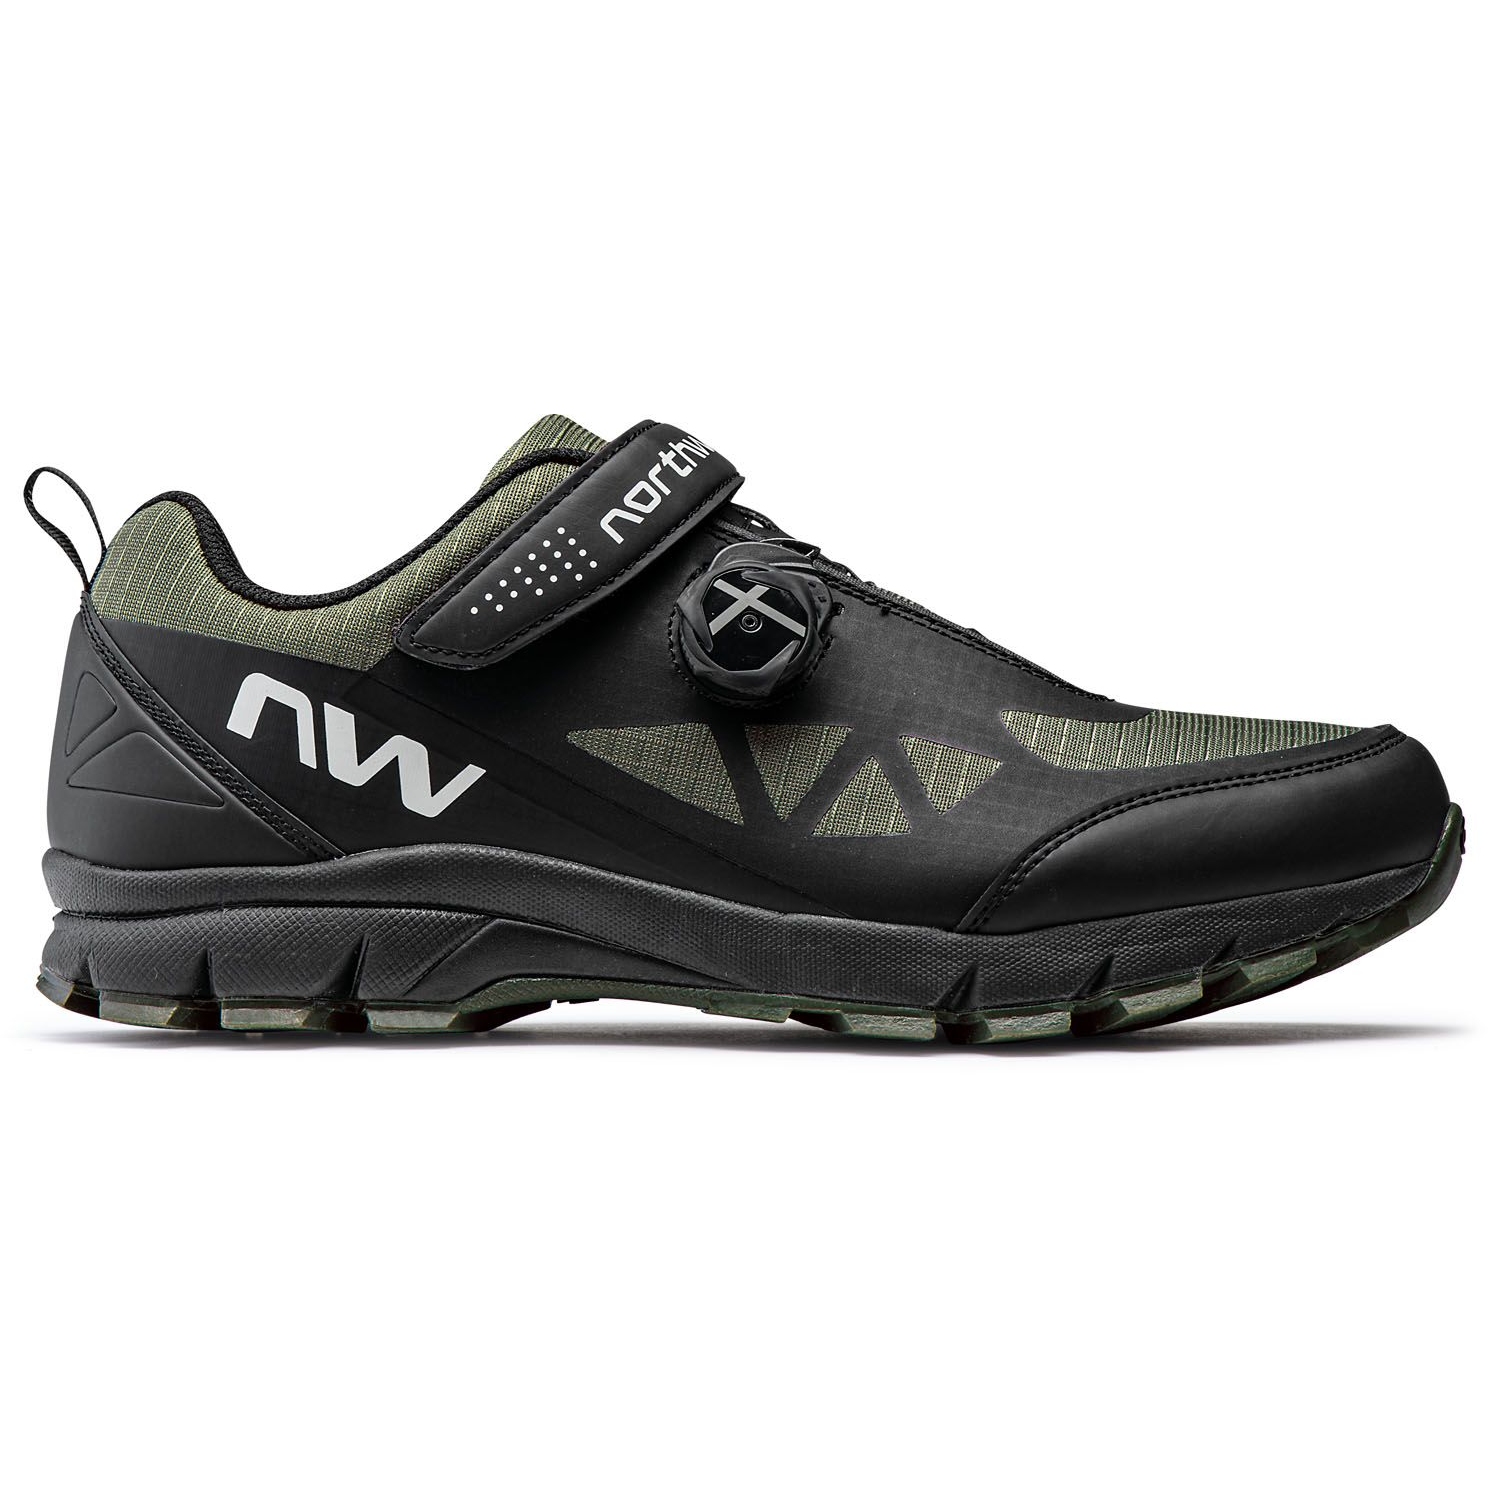 Picture of Northwave Corsair All Terrain Shoes Men - black/forest green 02